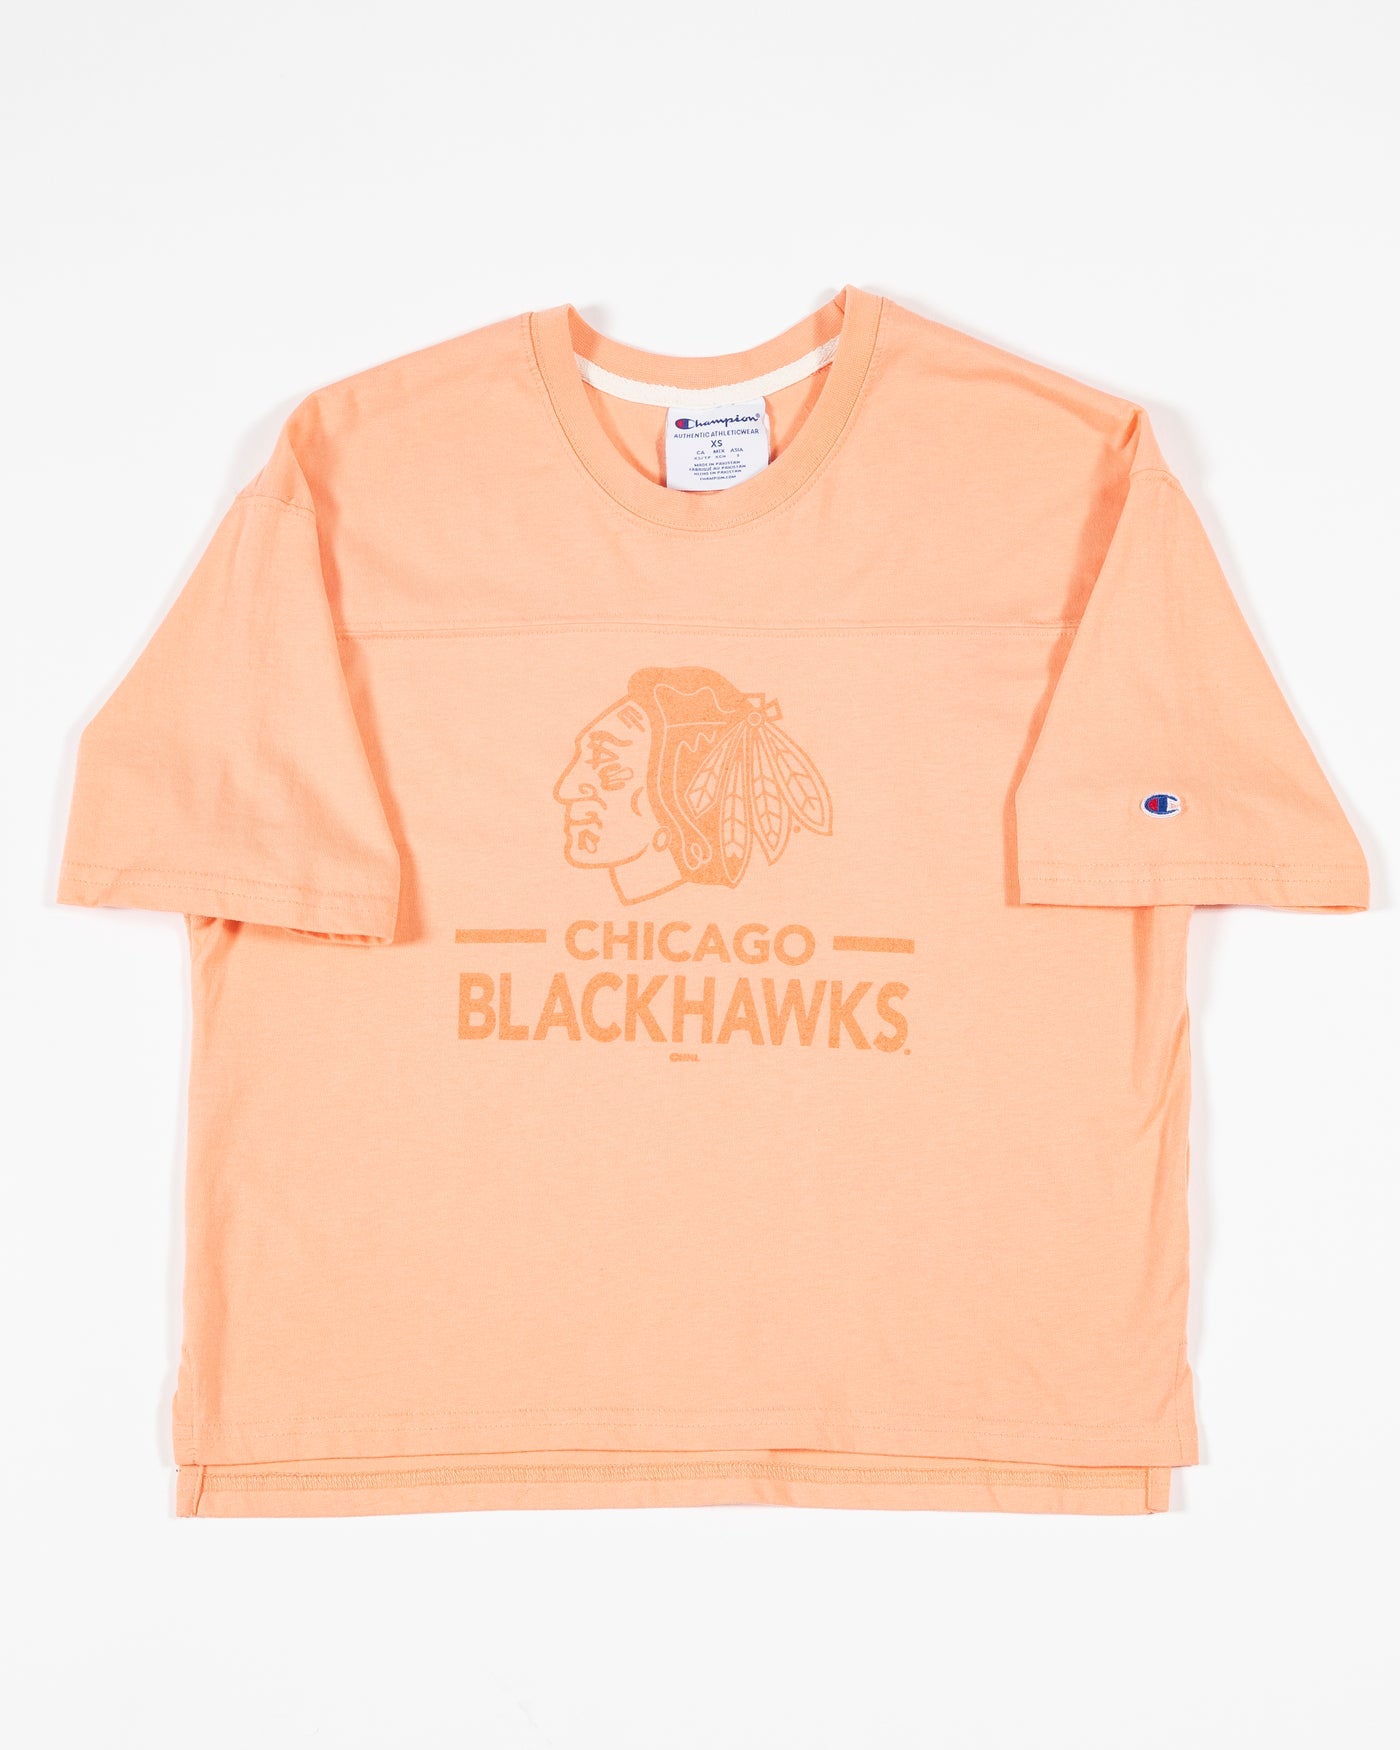 peach Champion cropped tee with Chicago Blackhawks primary logo and wordmark across the chest - front lay flat